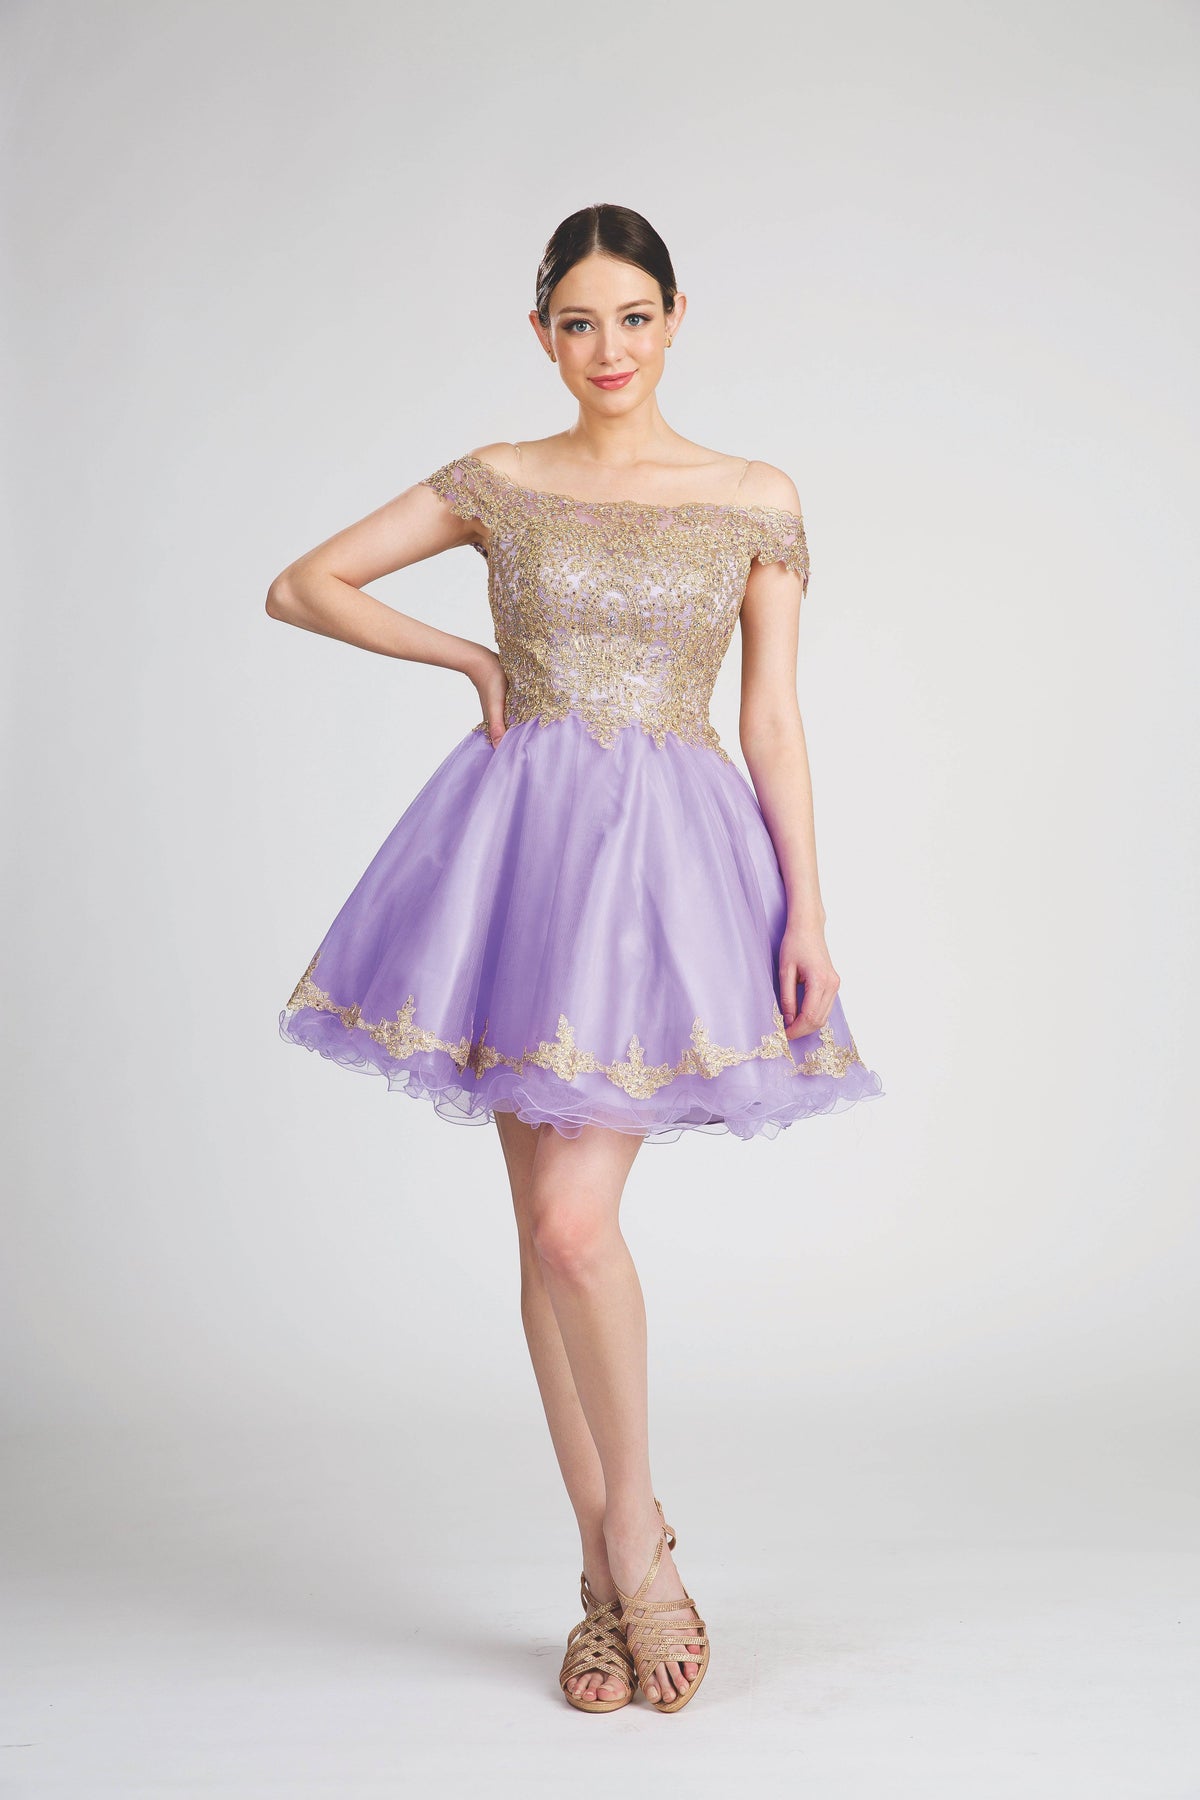 Fiesta 53151 Lace & Crystal Embroidered Lilac Damas Dress | 5 Colors - NORMA REED